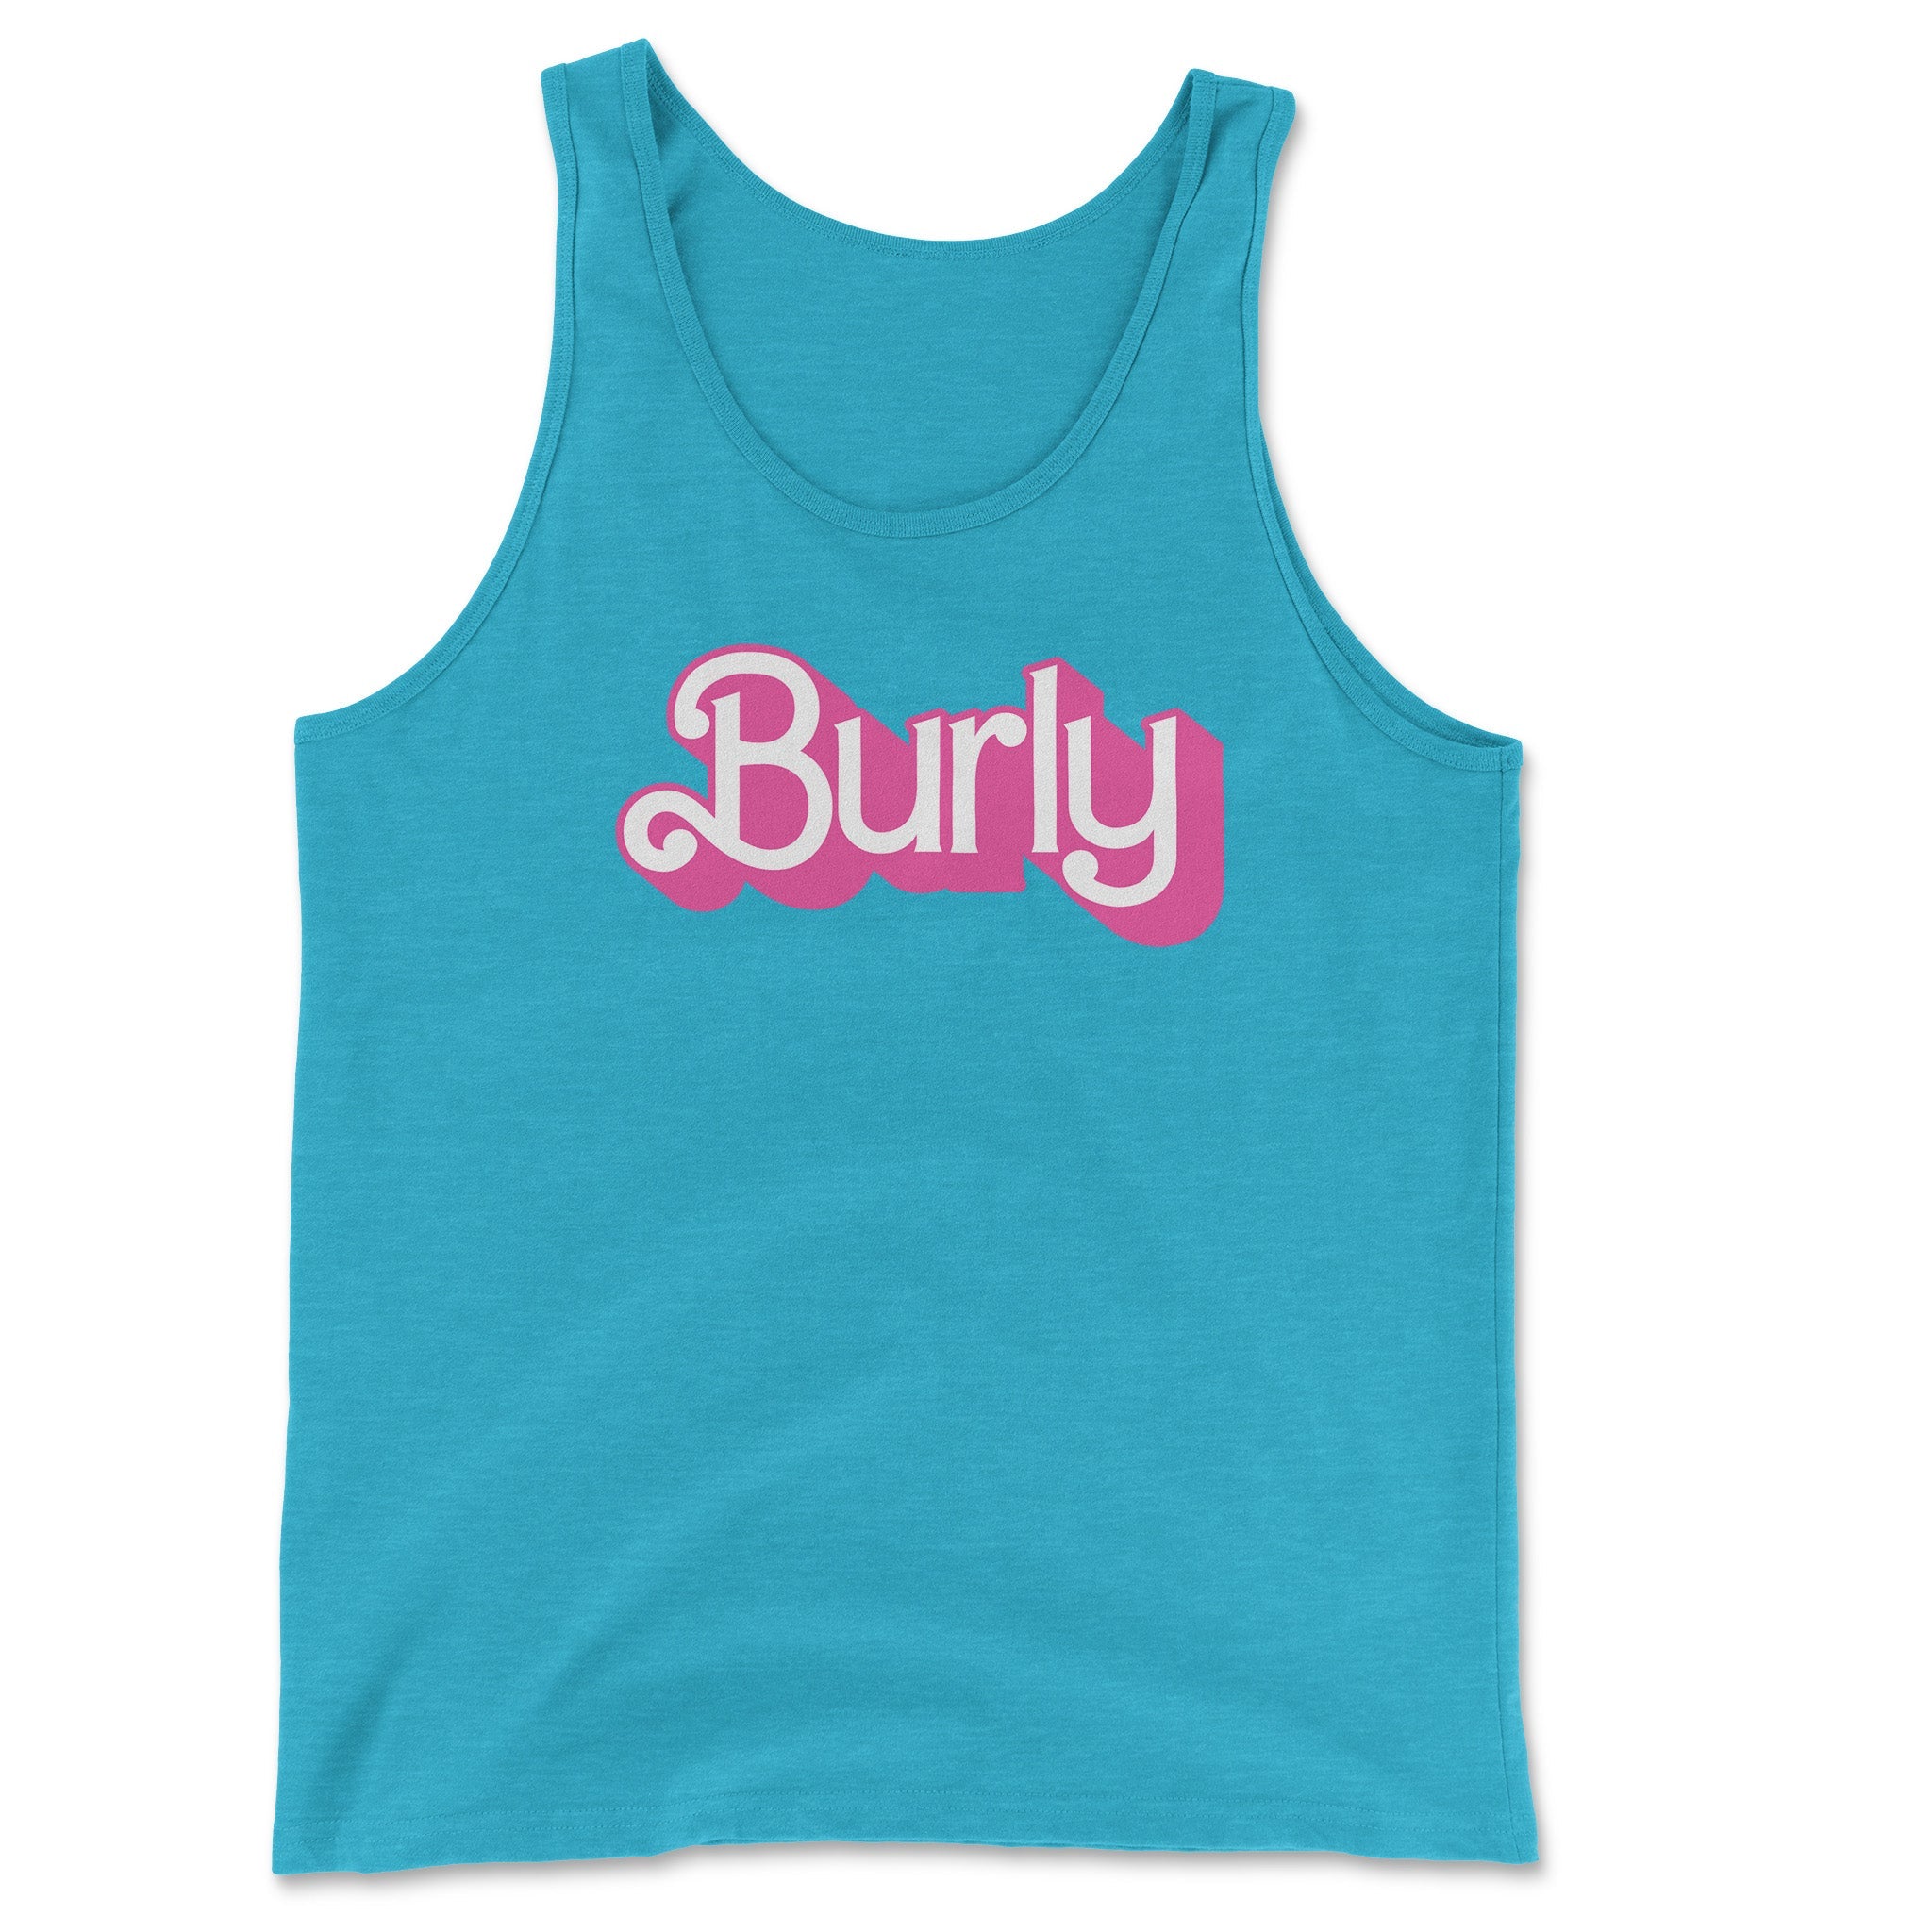 Burly Tank Top - Embrace Your Sturdy Charm - Hunky Tops#color_Aqua TriBlend